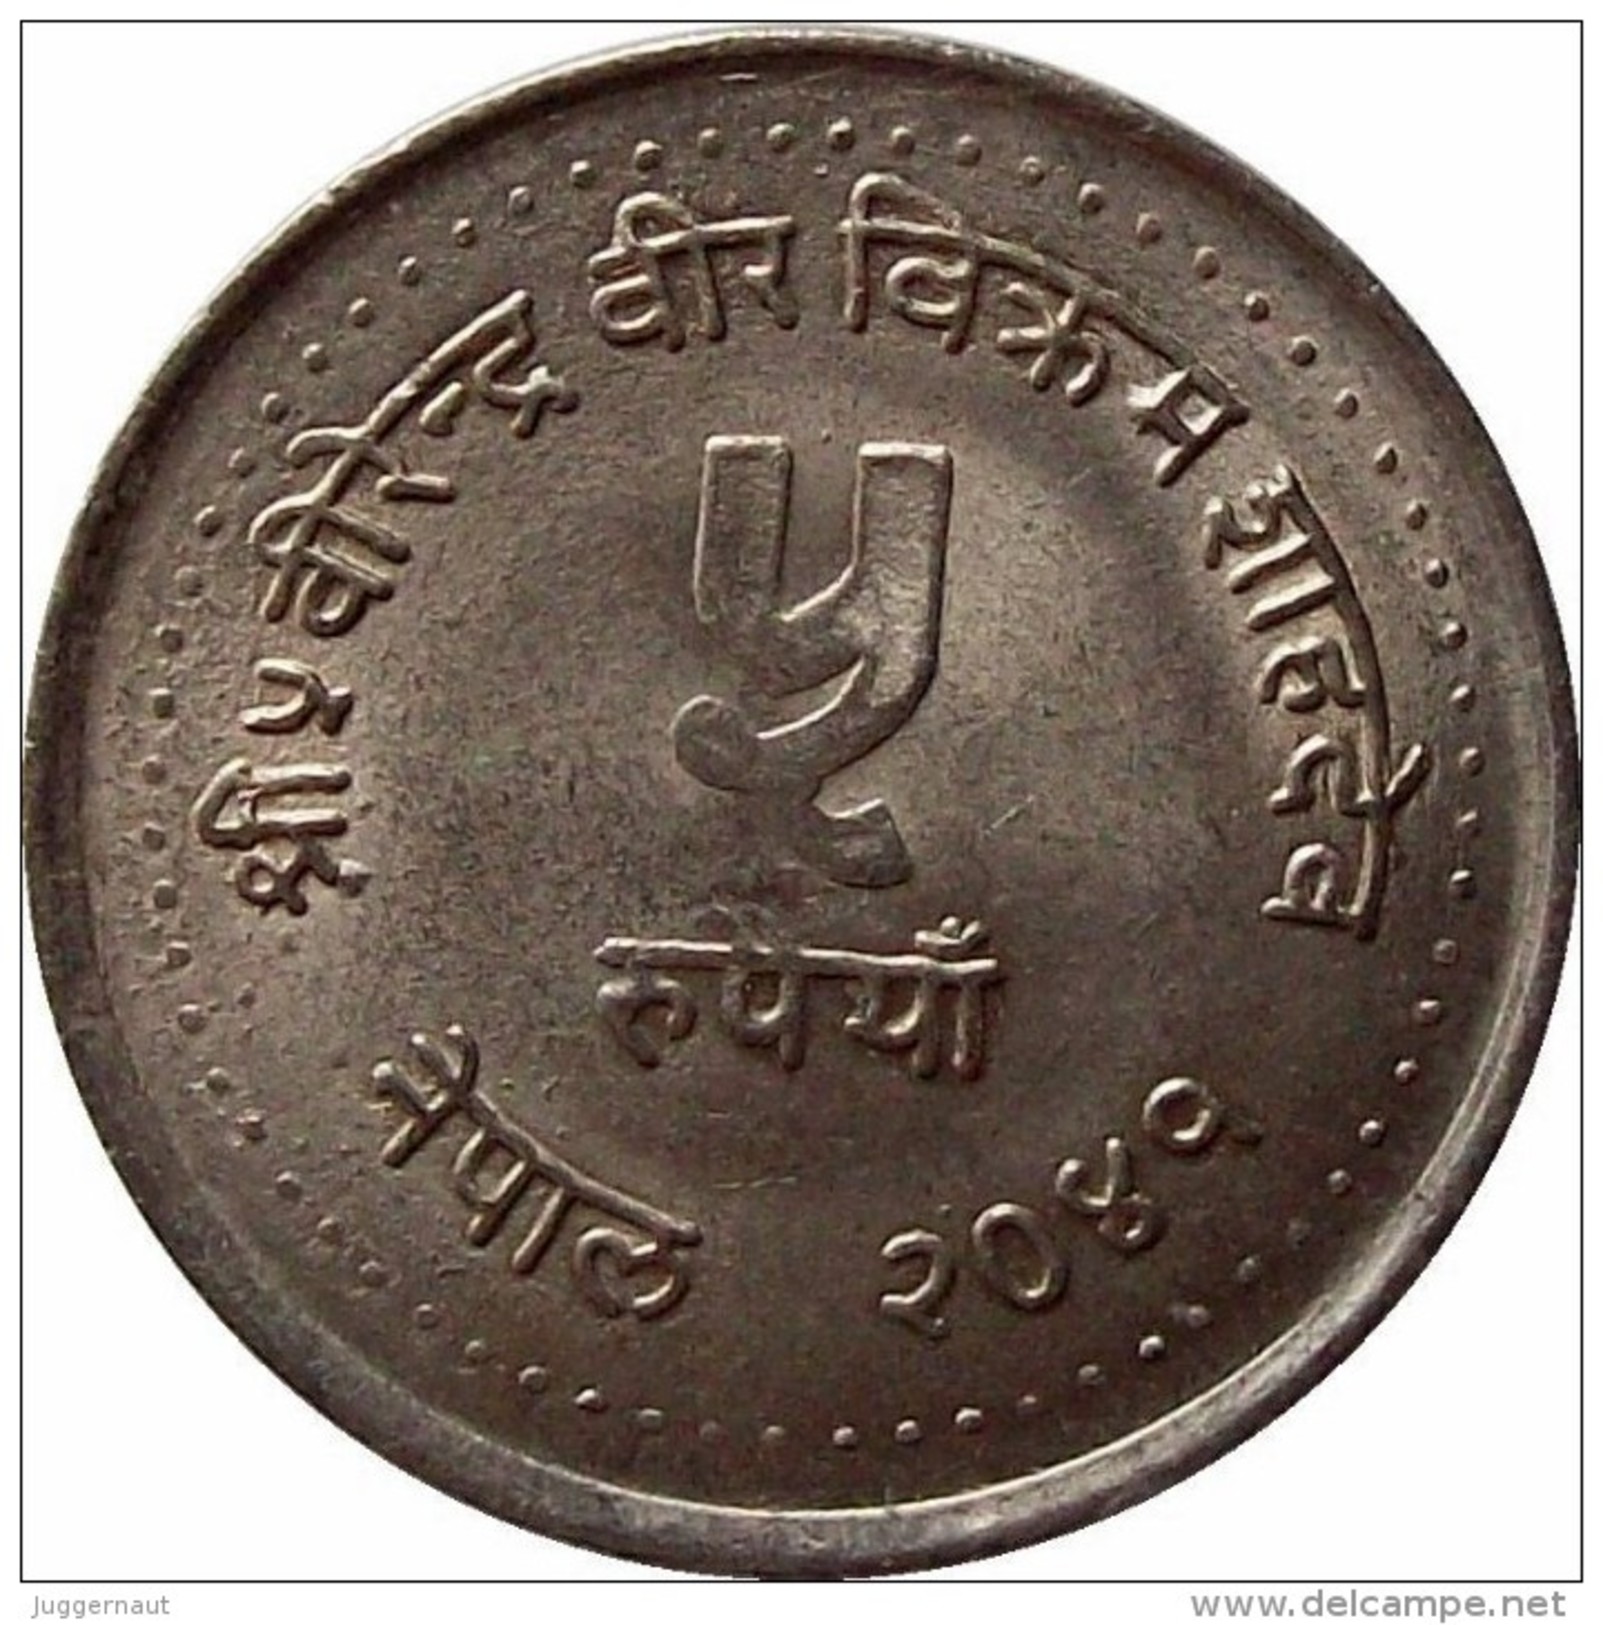 FAMILY PLANNING ASSOCIATION SILVER JUBILEE Rs.5 COMMEMORATIVE COIN NEPAL 1984 KM-1017 UNCIRCULATED UNC - Nepal